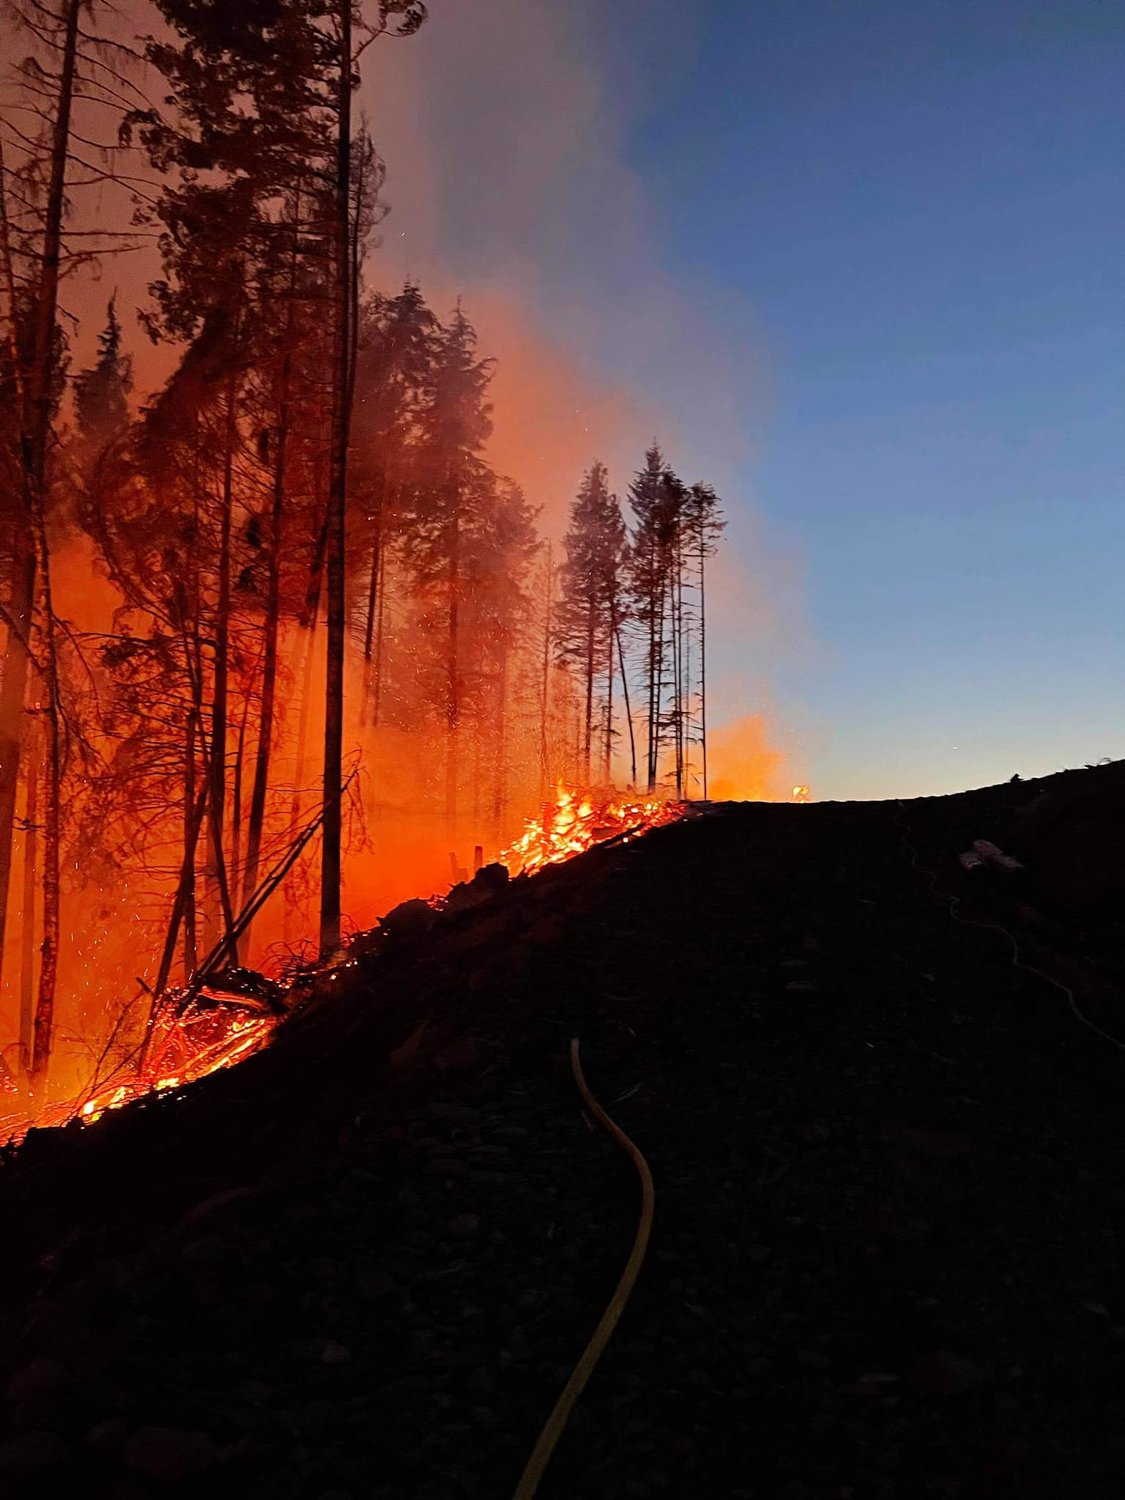 Flames burn through trees at the Mineral Fire in this photograph captured by Terry Boyet.